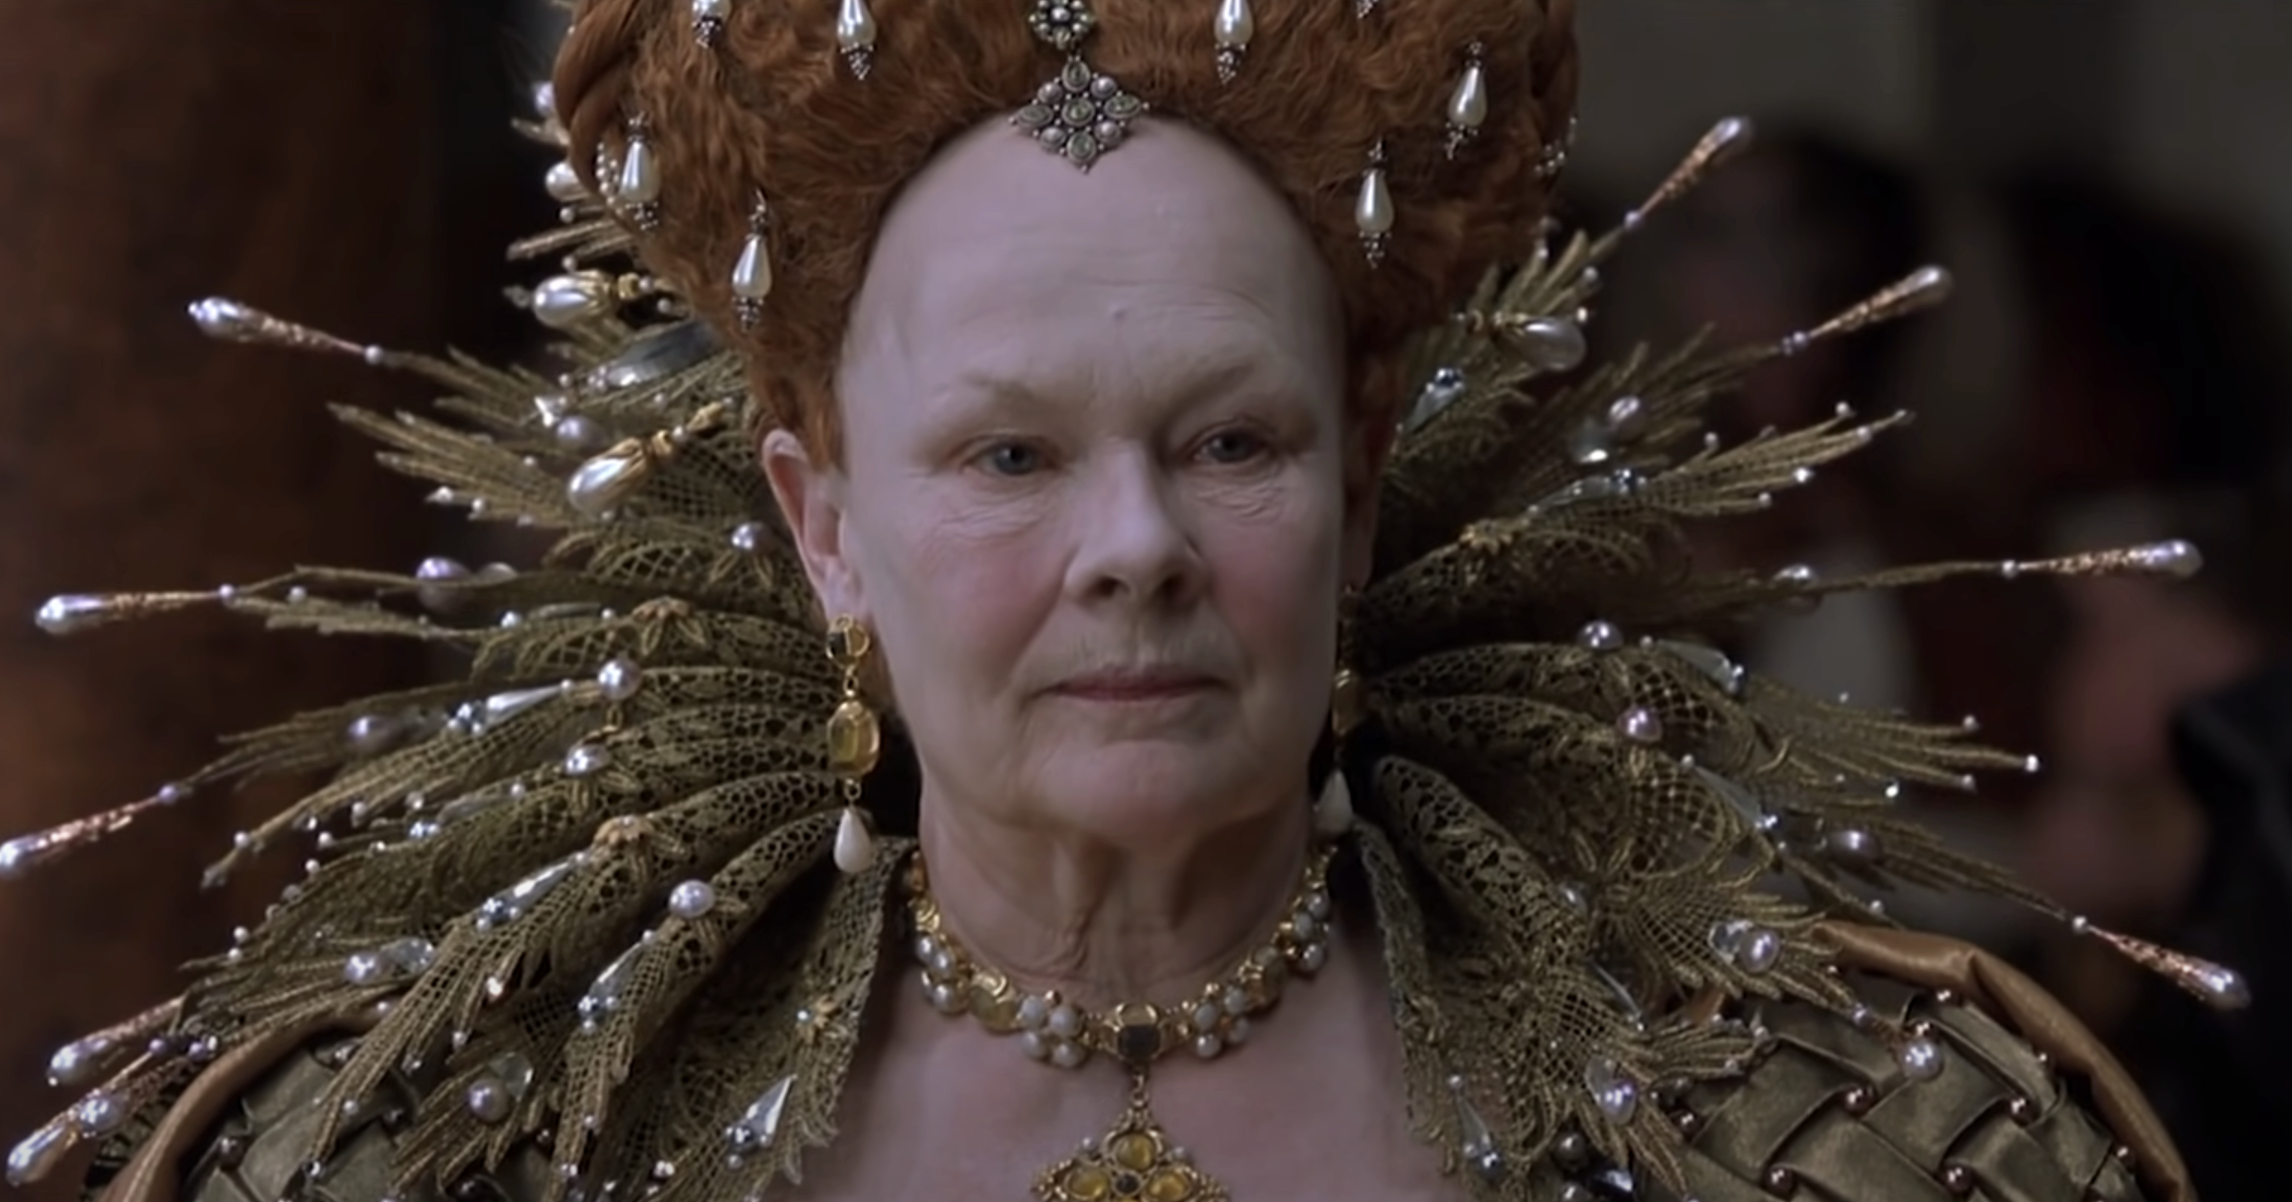 Queen Elizabeth I in ornate costume with ruff and jeweled headpiece